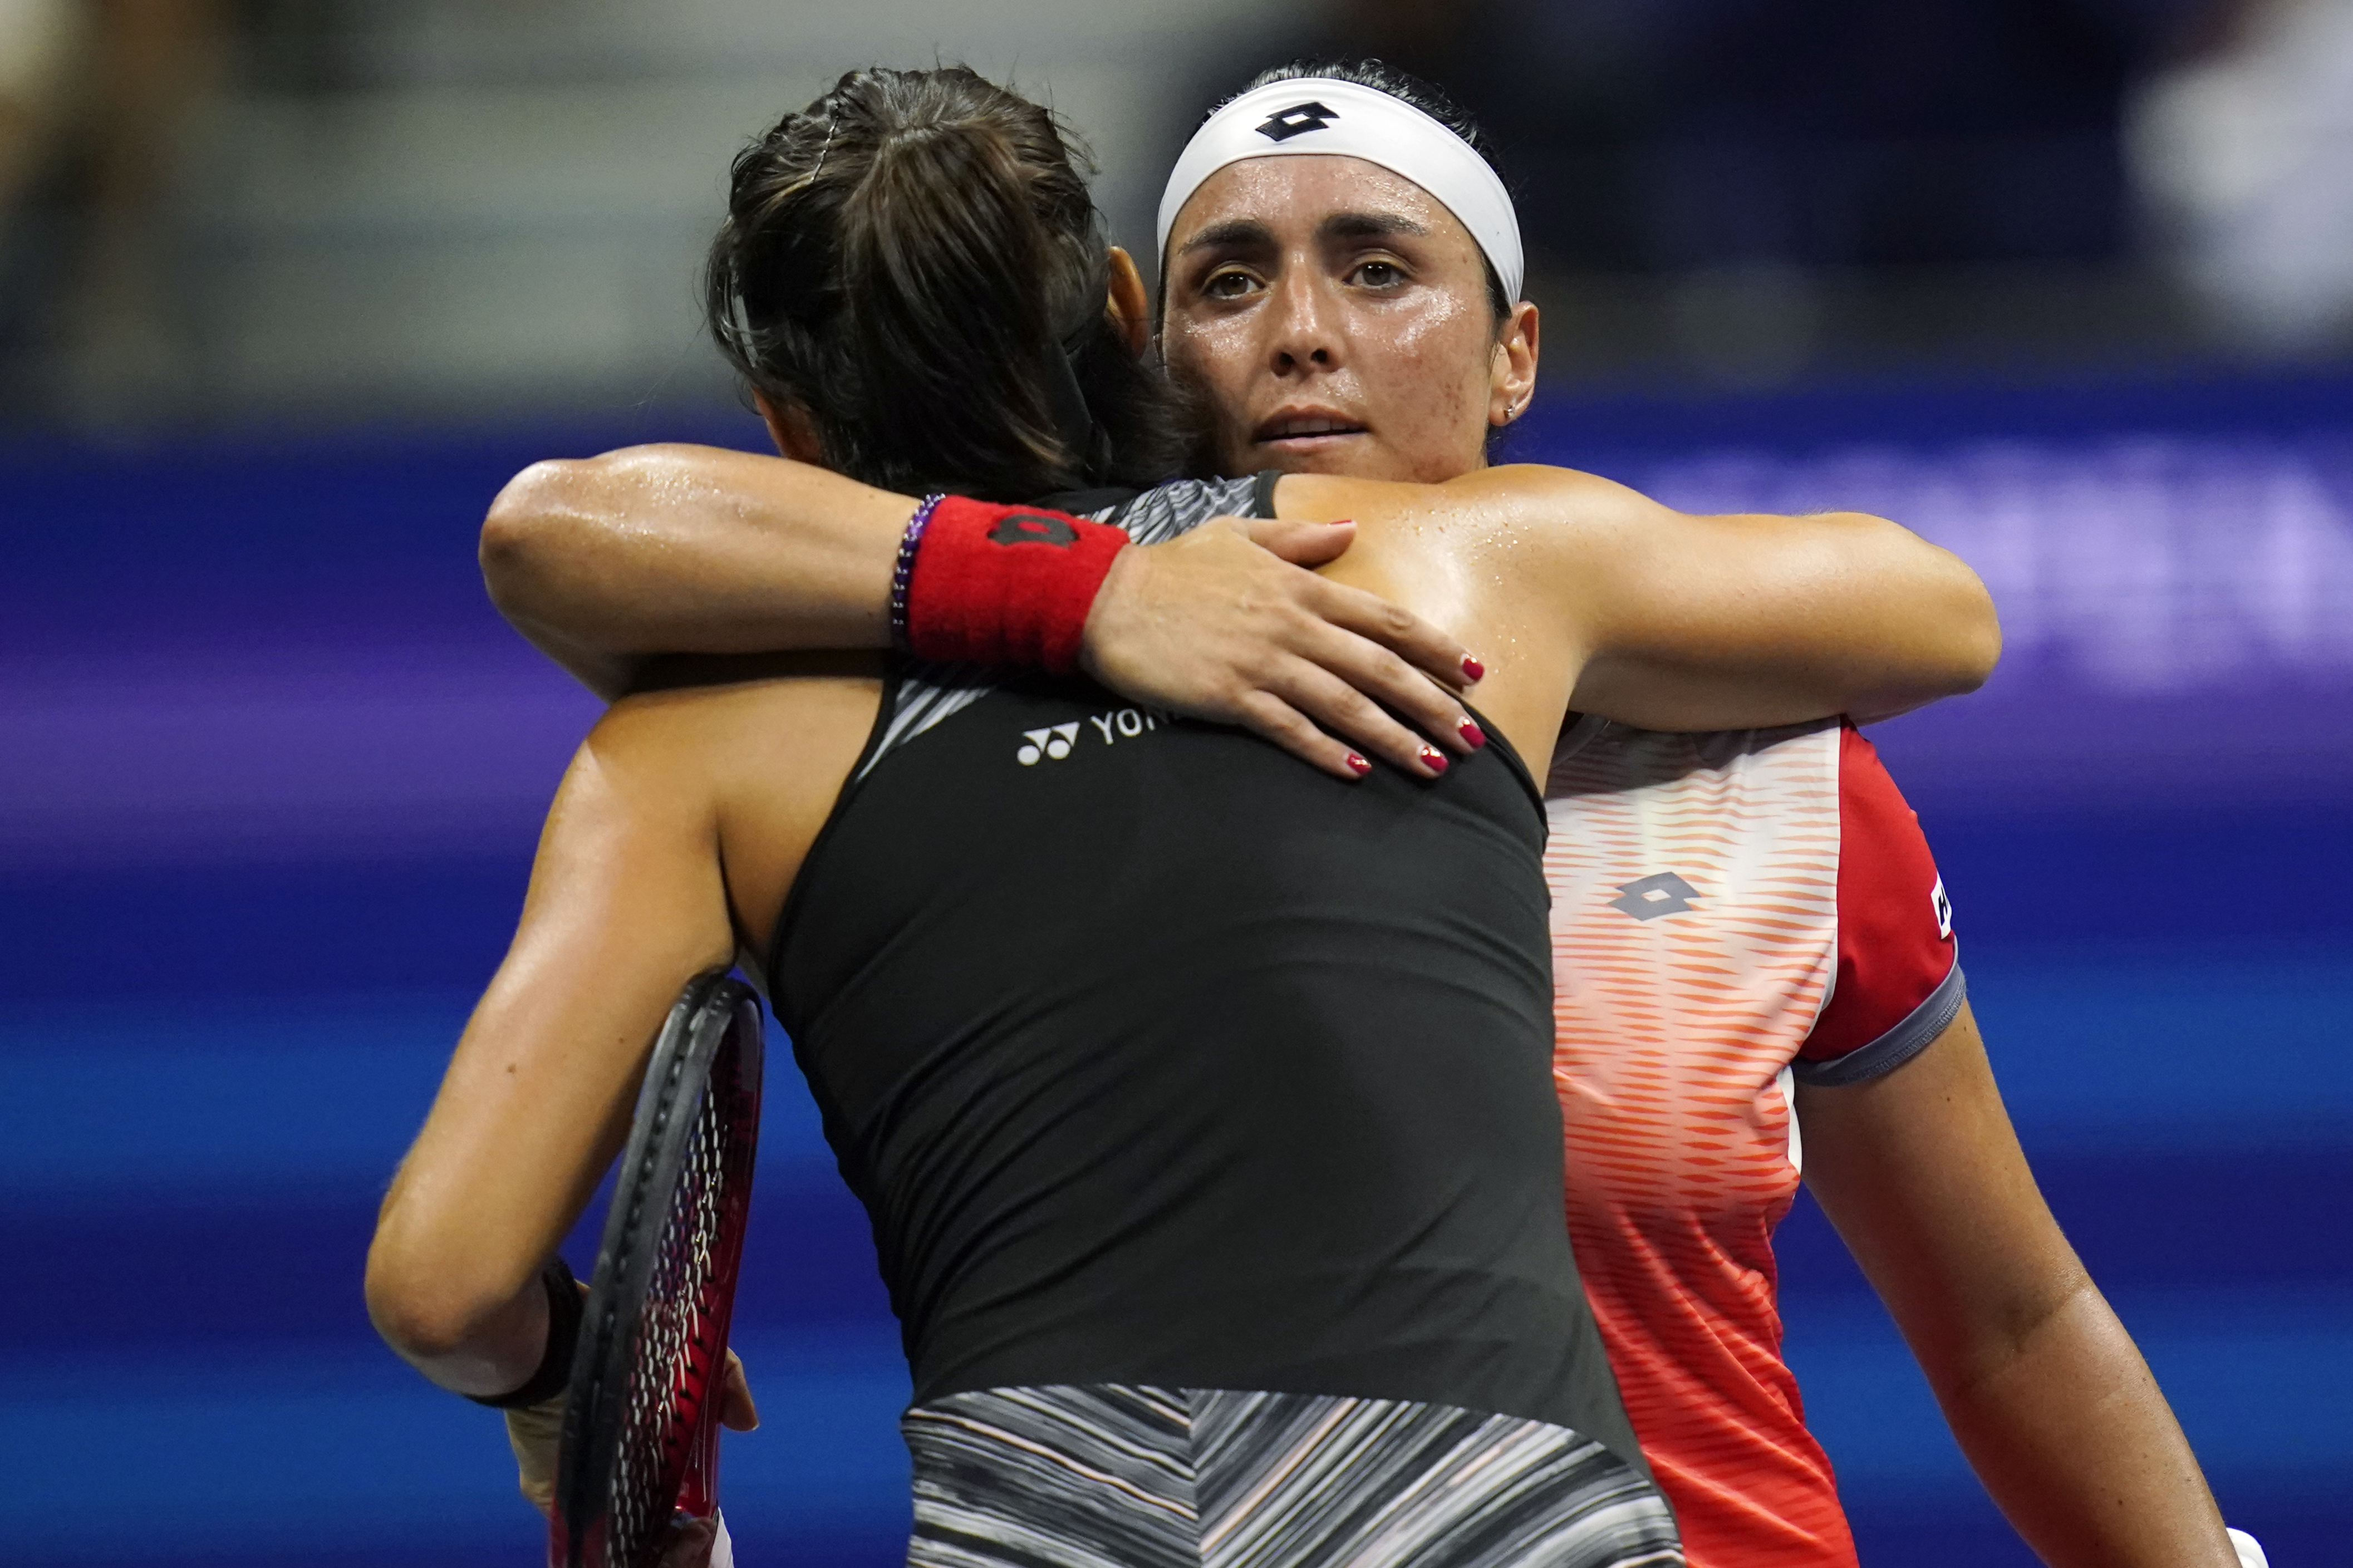 Ons Jabeur, of Tunisia, right, embraces Caroline Garcia, of France, after defeating her in the semifinals of the U.S. Open tennis championships on Thursday, Sept. 8, 2022, in New York. (AP Photo/Charles Krupa)